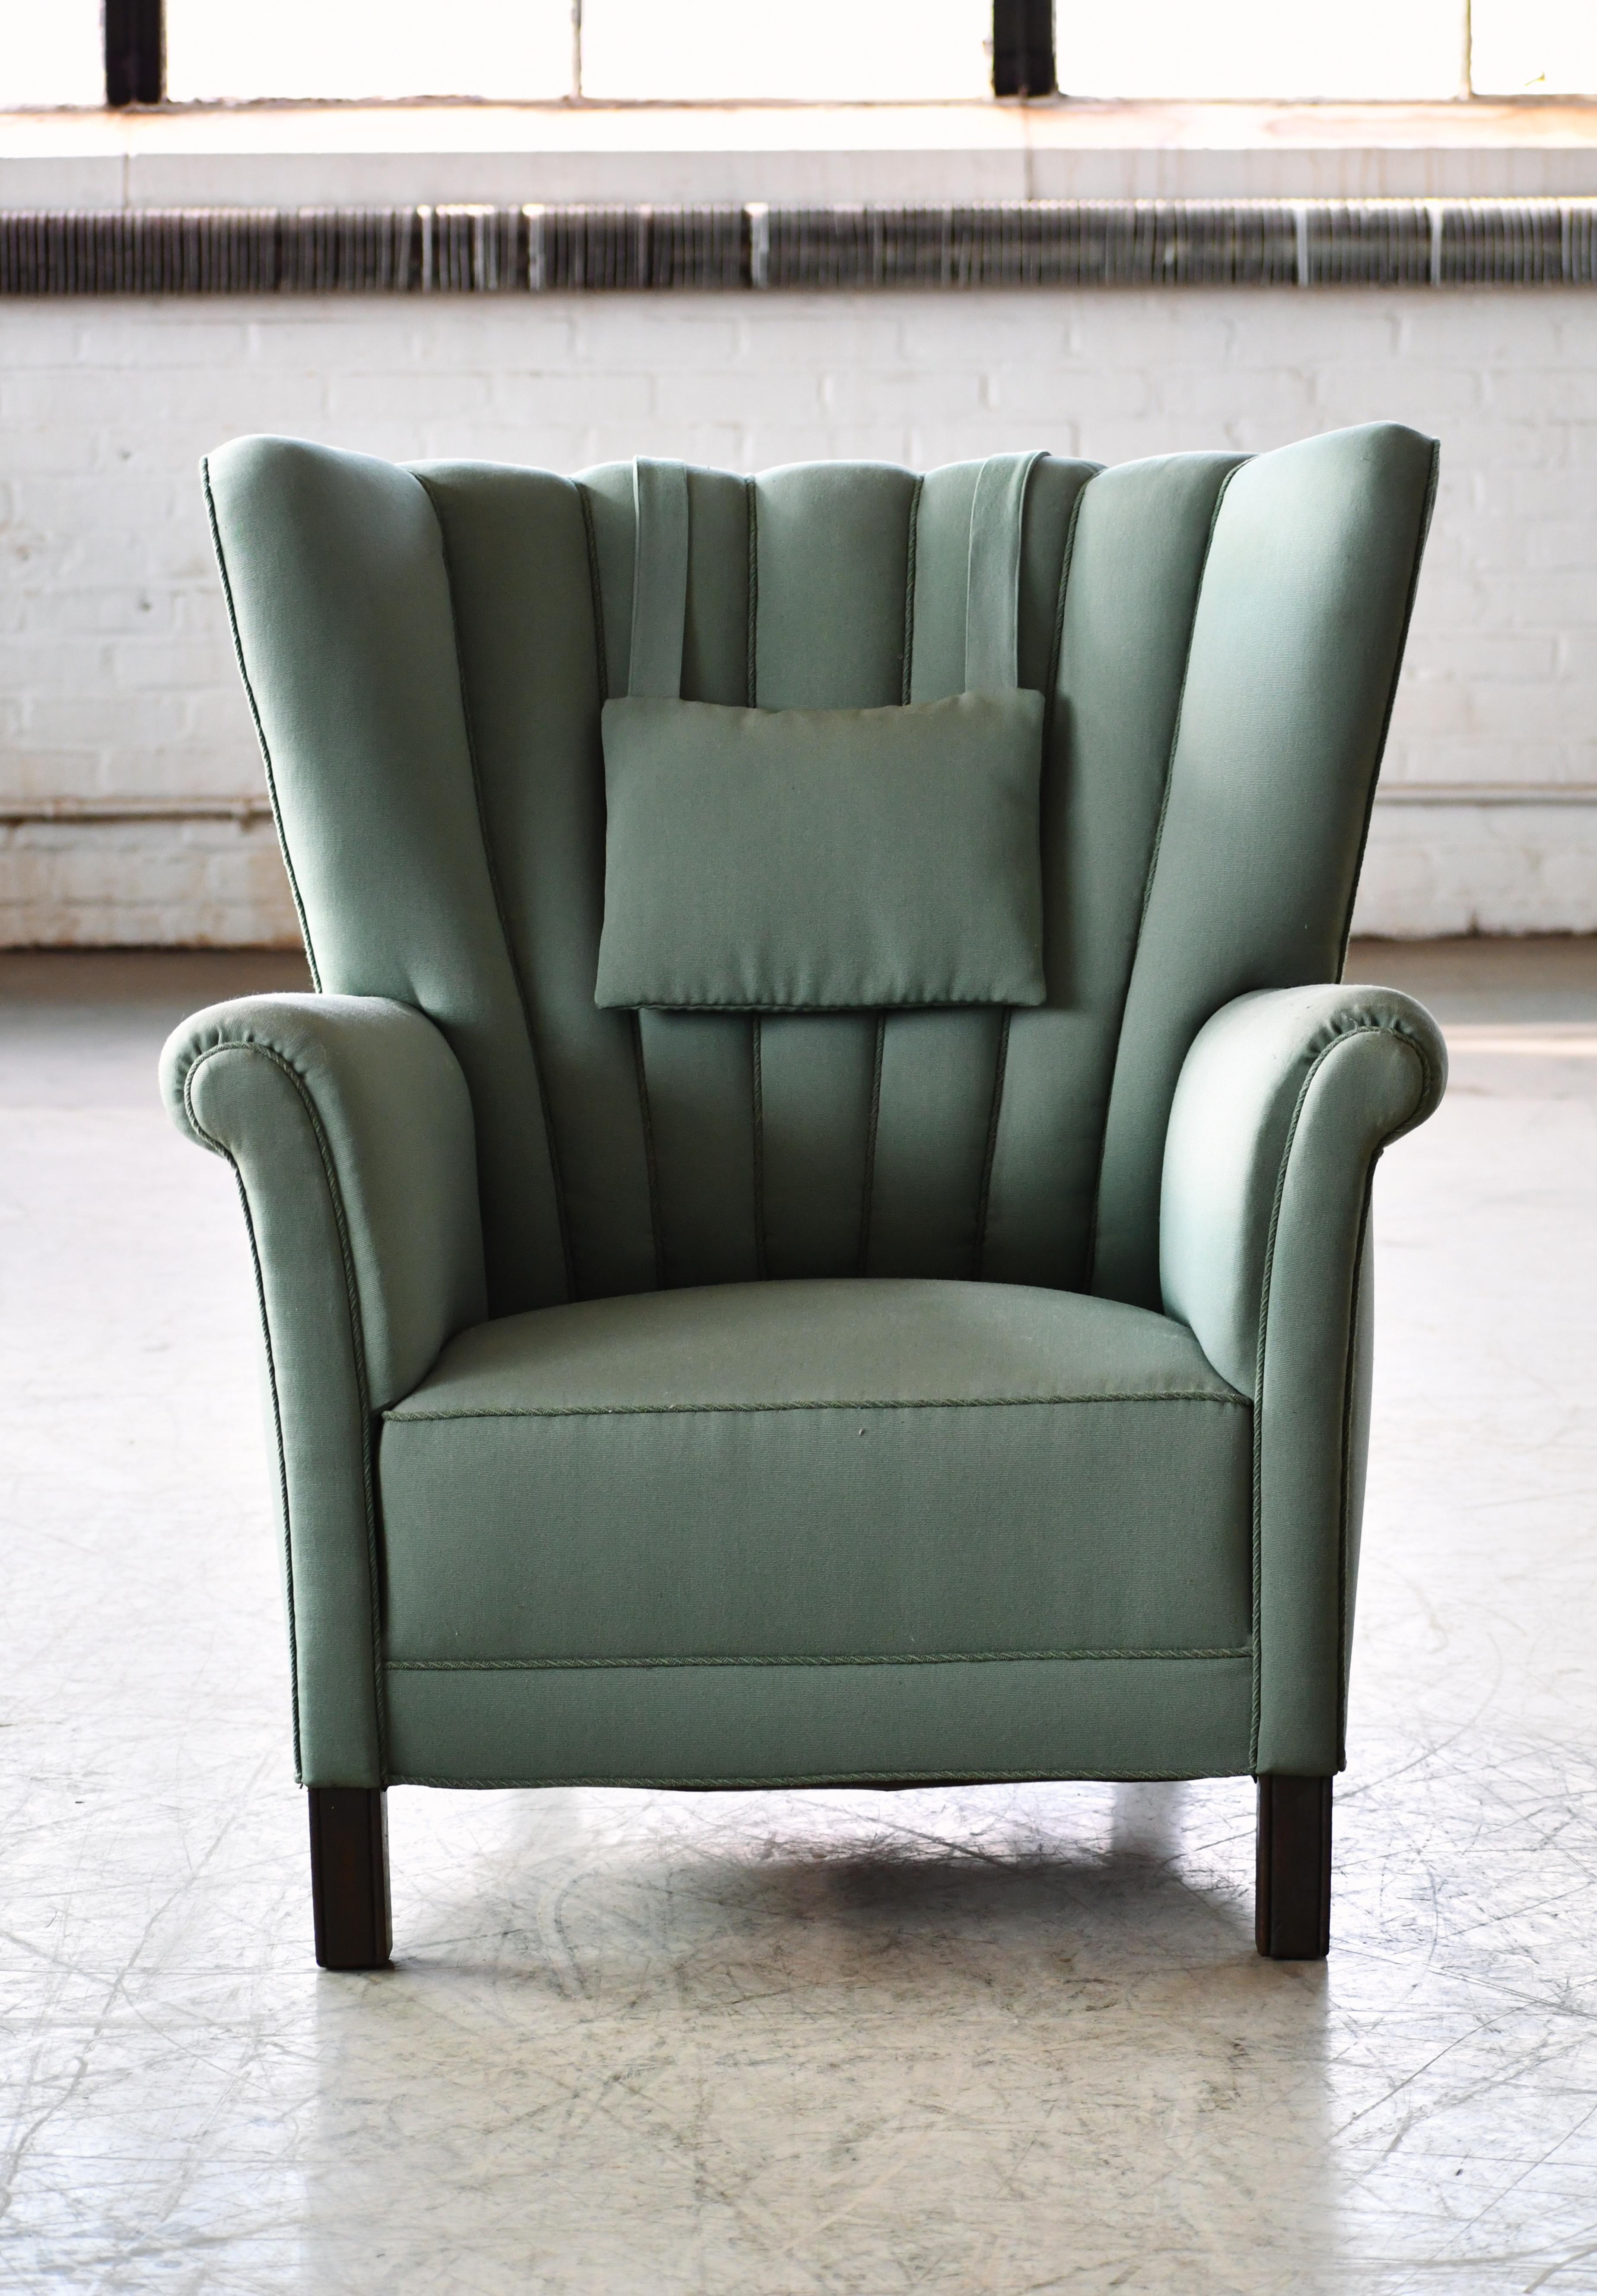 Sublime medium size club chair reminiscent of Fritz Hansen's famous model 1518 and likely made in the late around 1950 judging from the leg design and the slimmer armrests. The chair is unmarked and we are not aware of the Designer/Maker but since